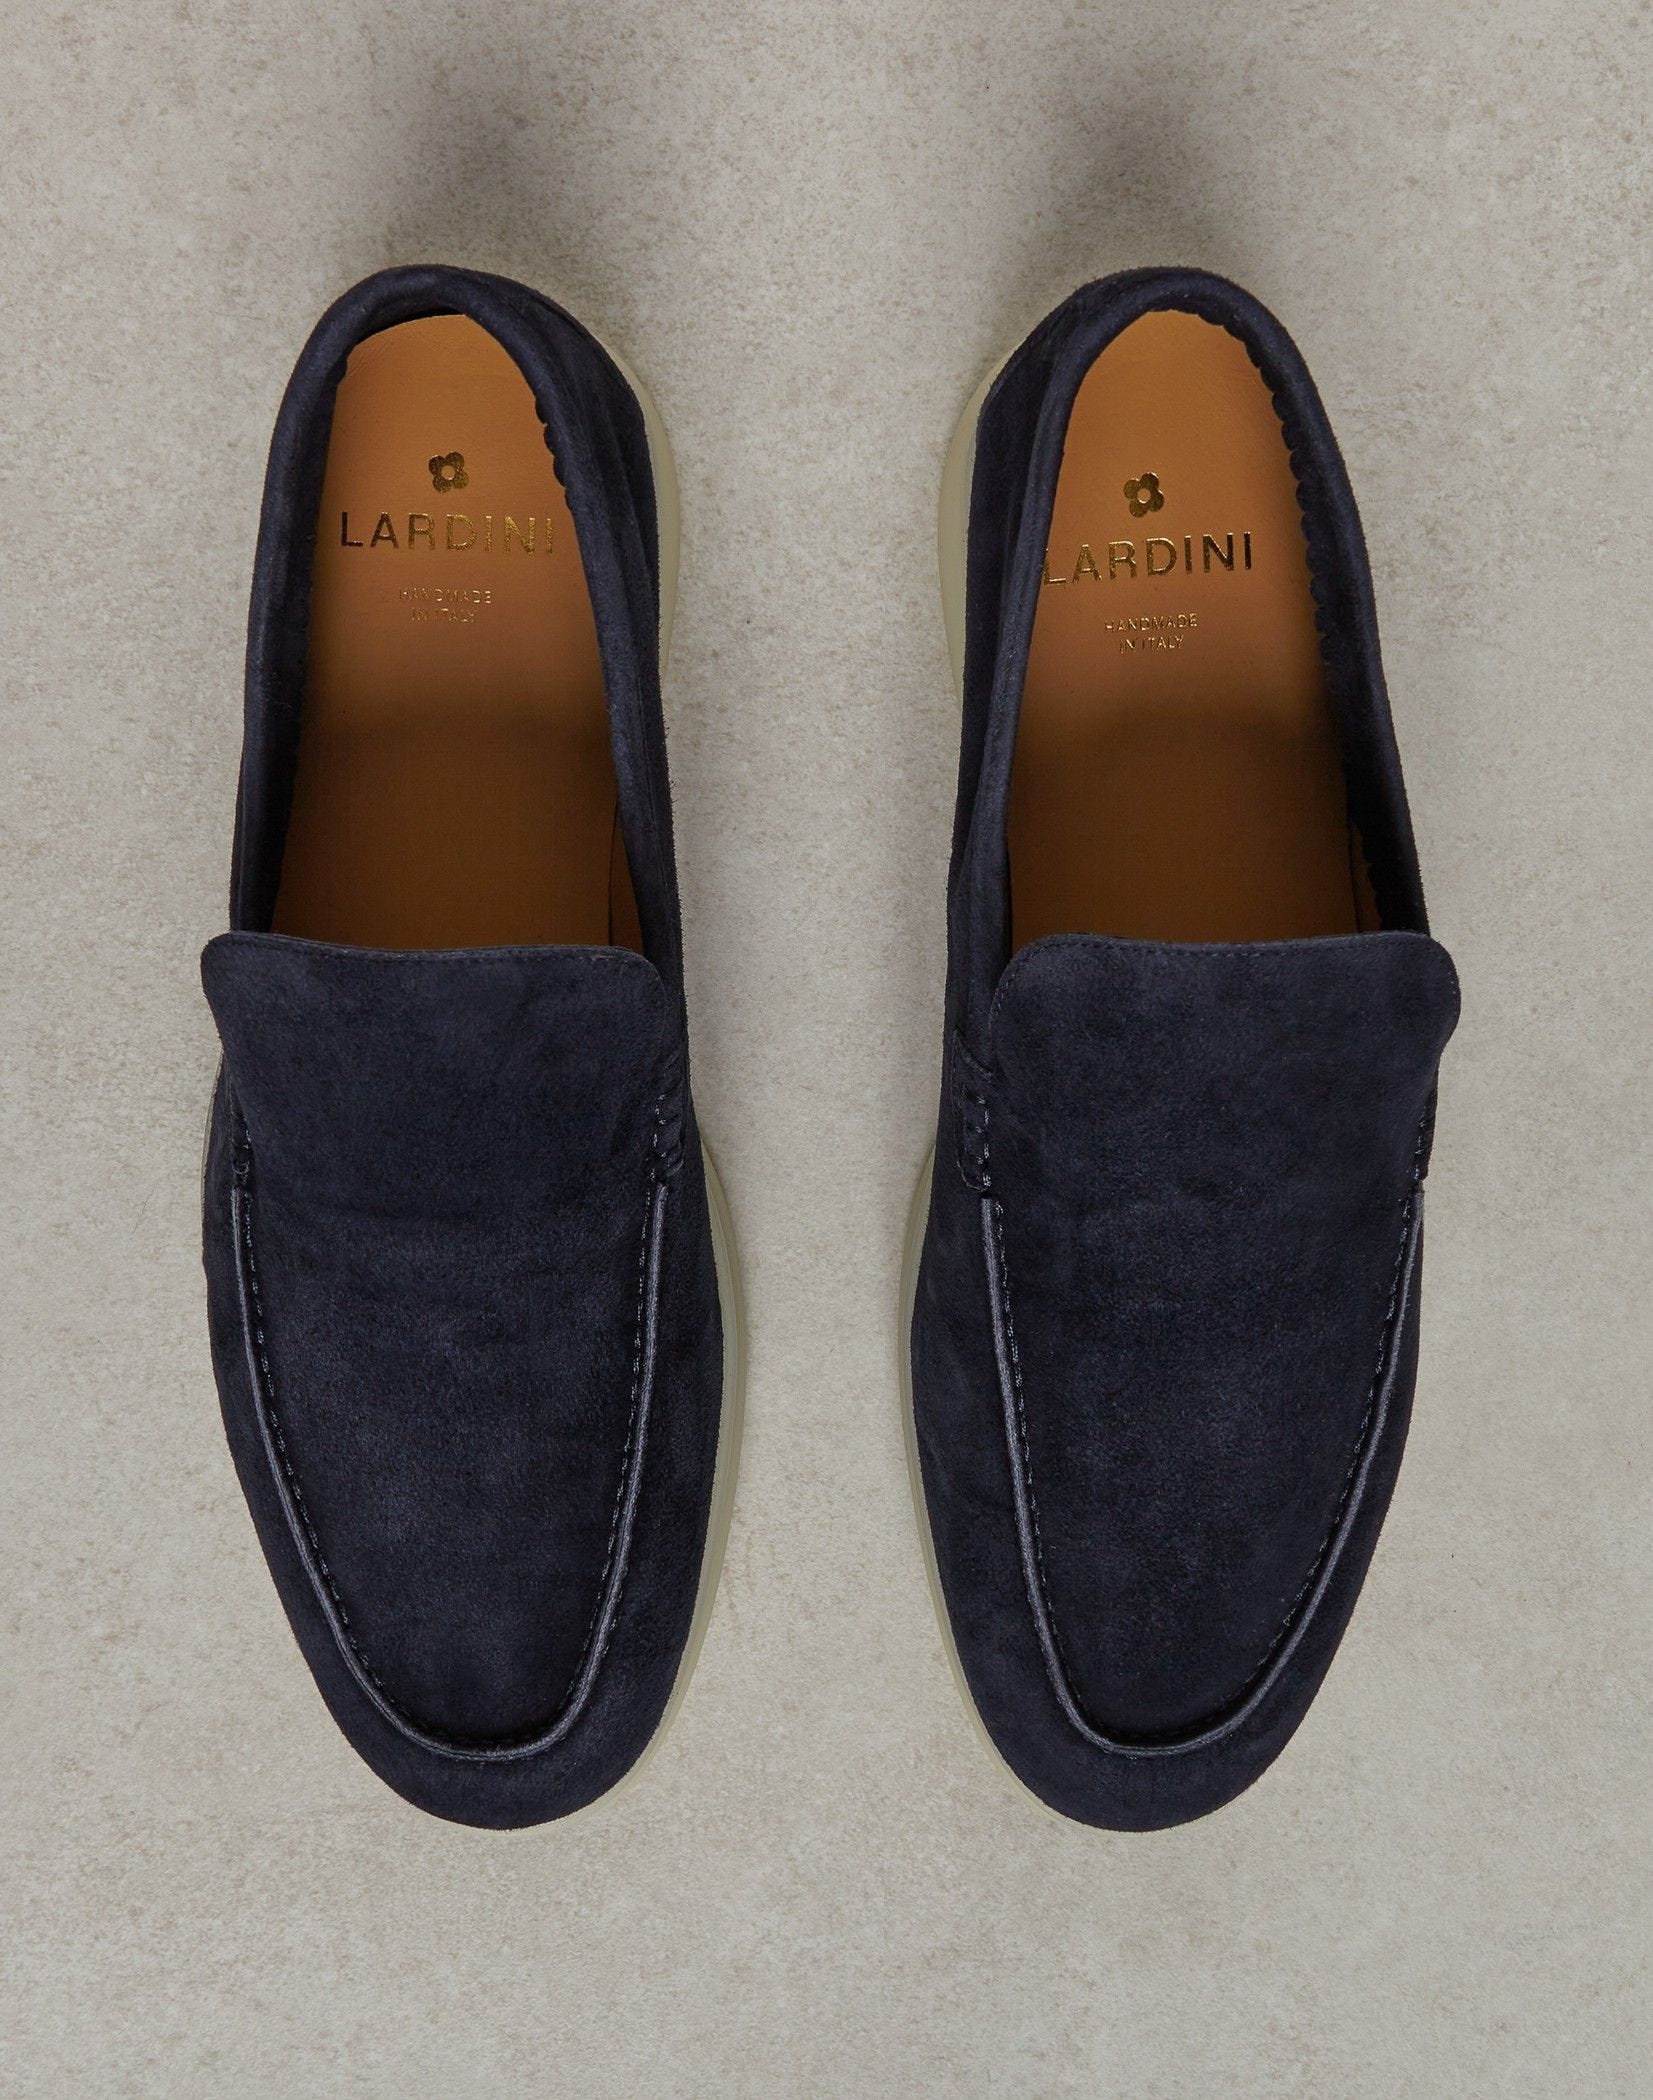 Blue suede classic loafer